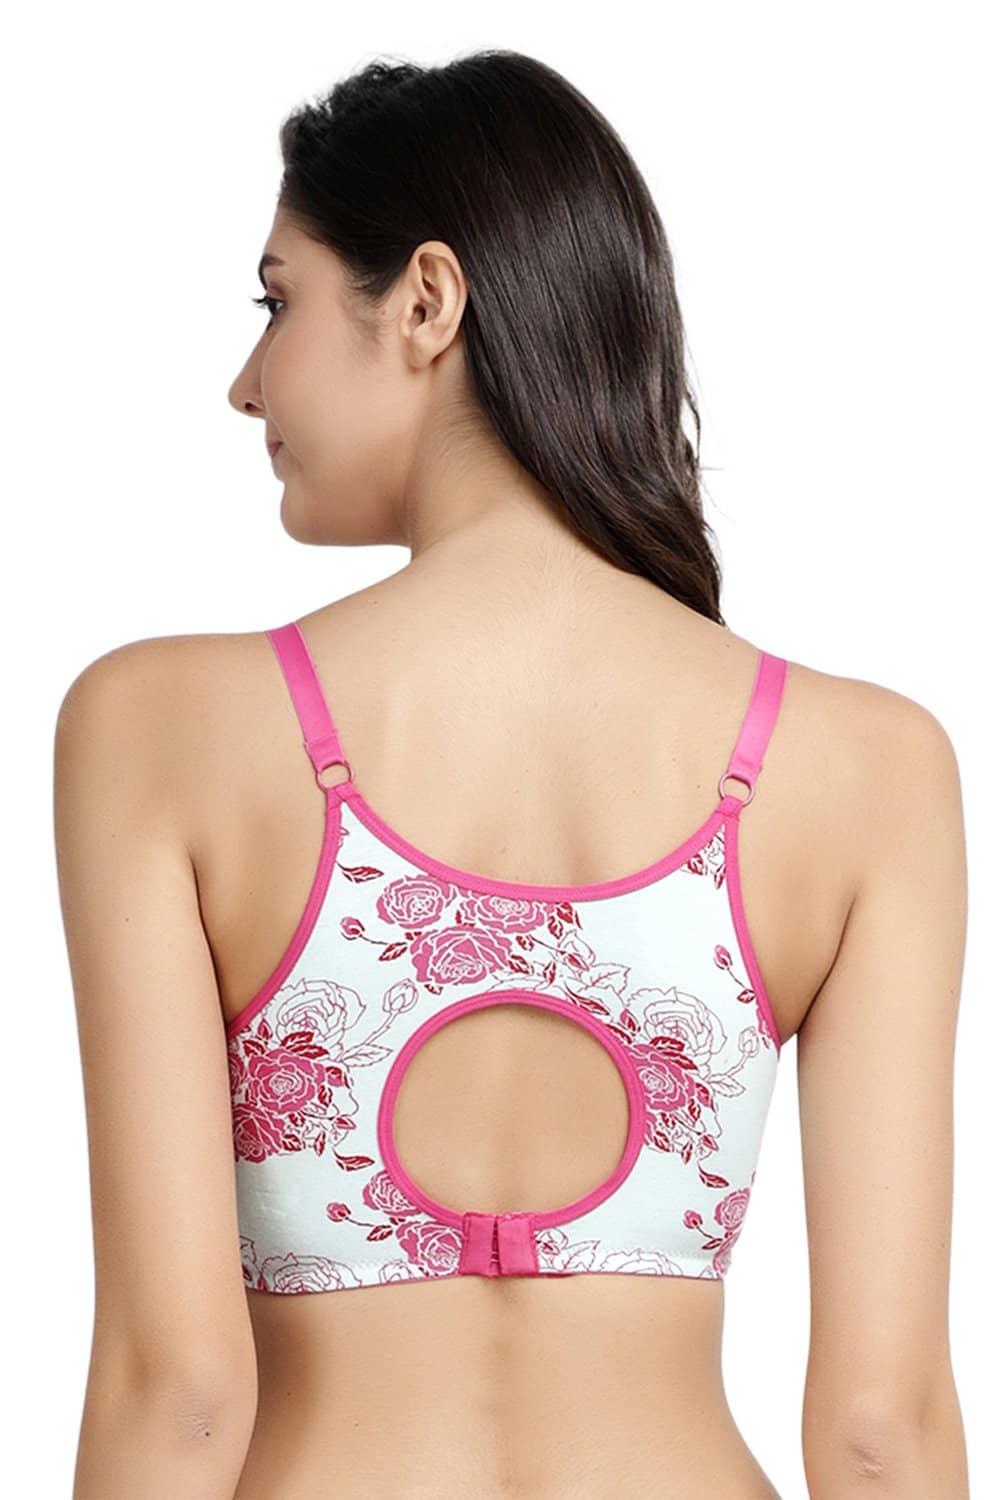 How To Return A Product Myntra Bra - Buy How To Return A Product Myntra Bra  online in India